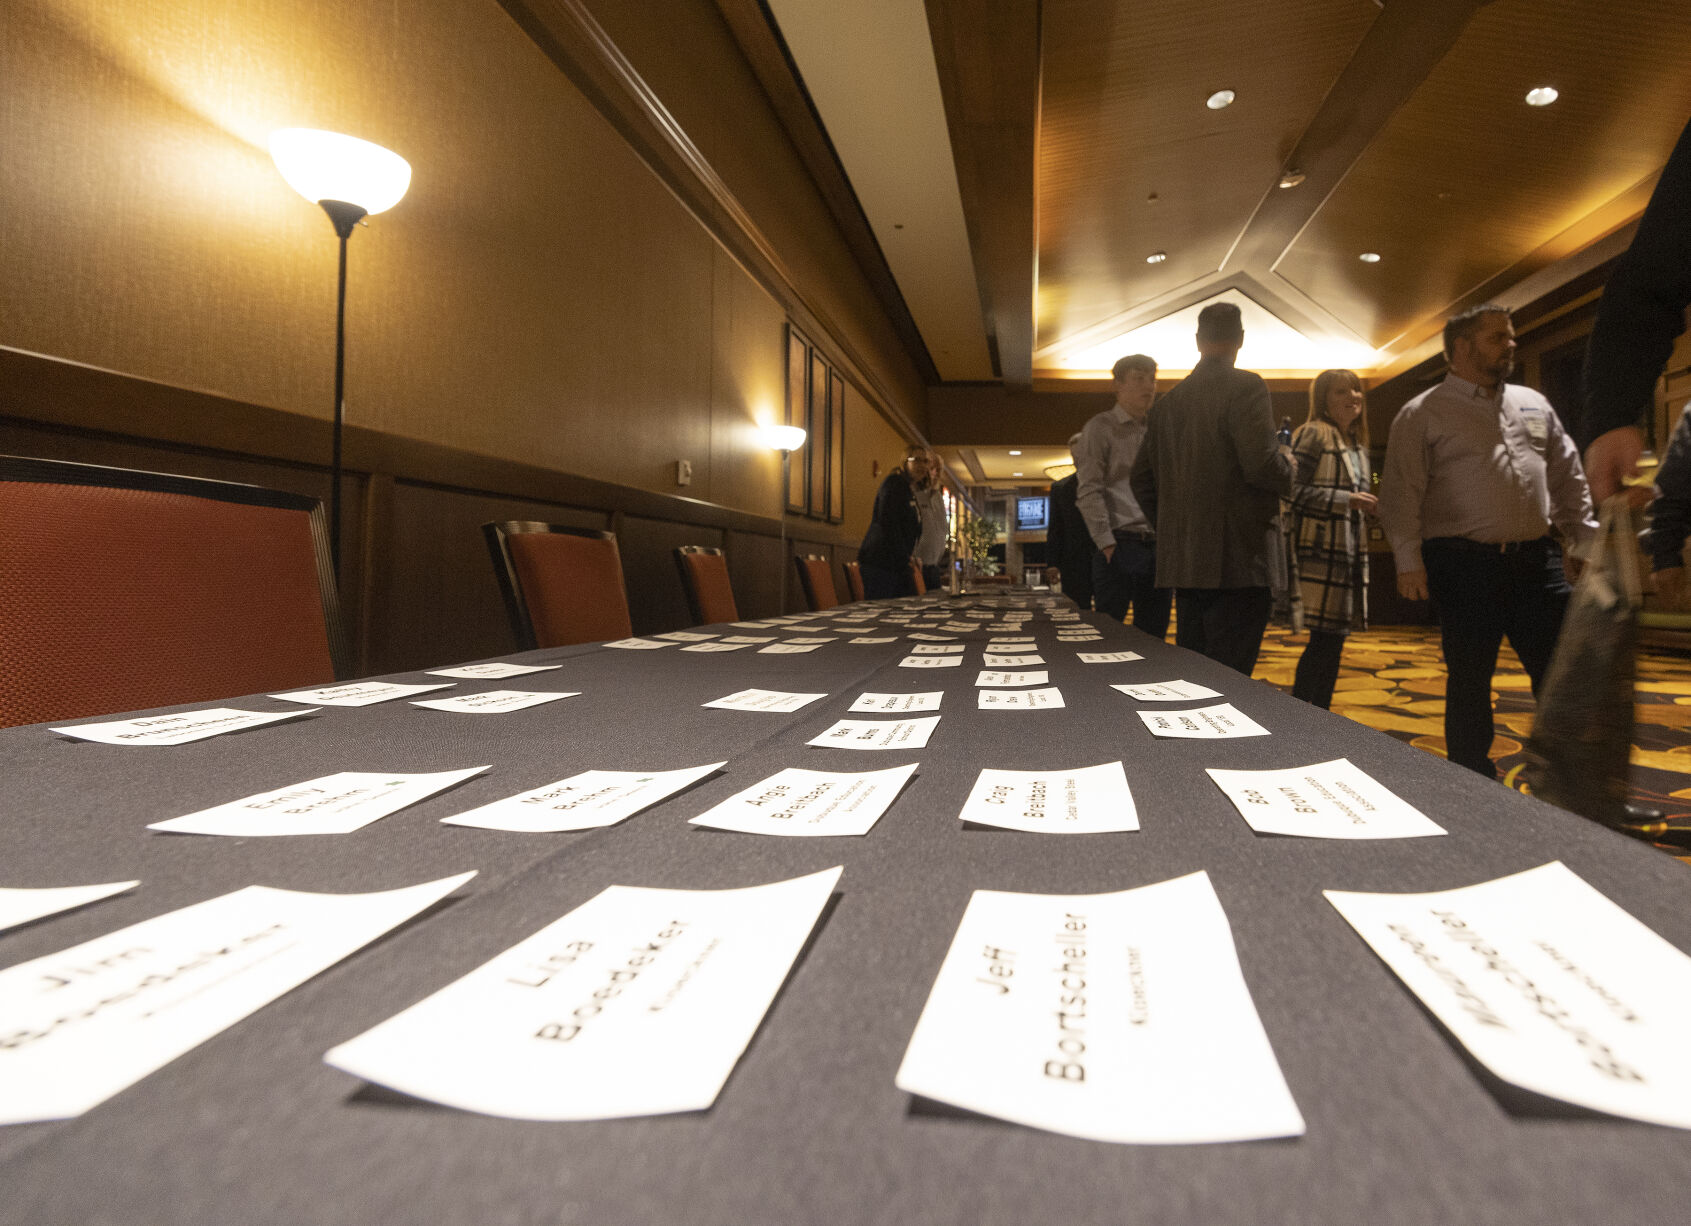 Name badges line the check in table.    PHOTO CREDIT: Stephen Gassman